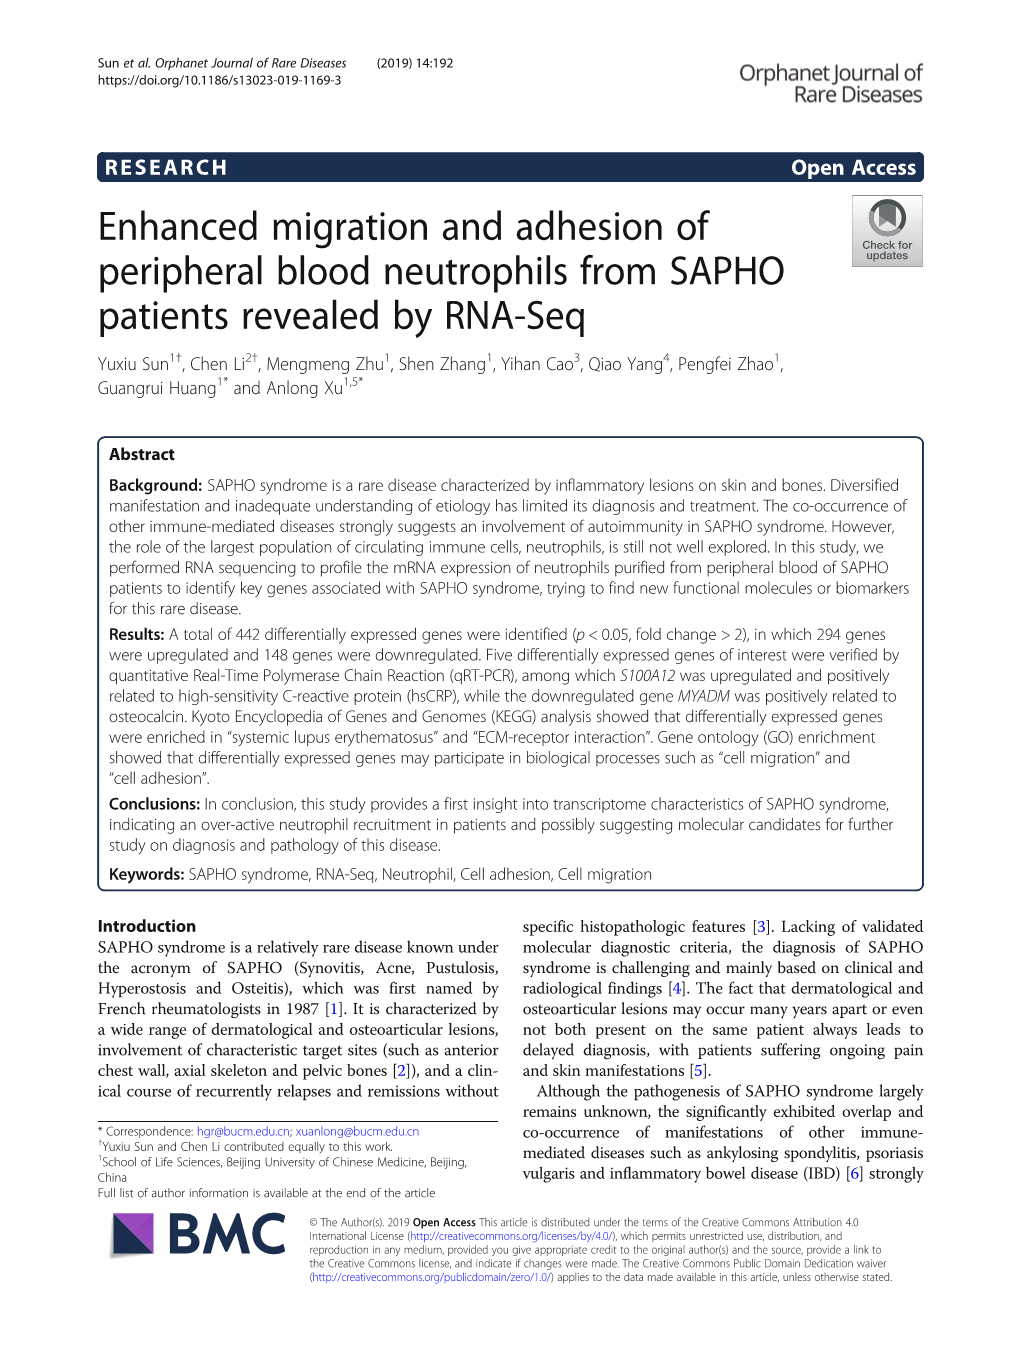 Enhanced Migration and Adhesion of Peripheral Blood Neutrophils From